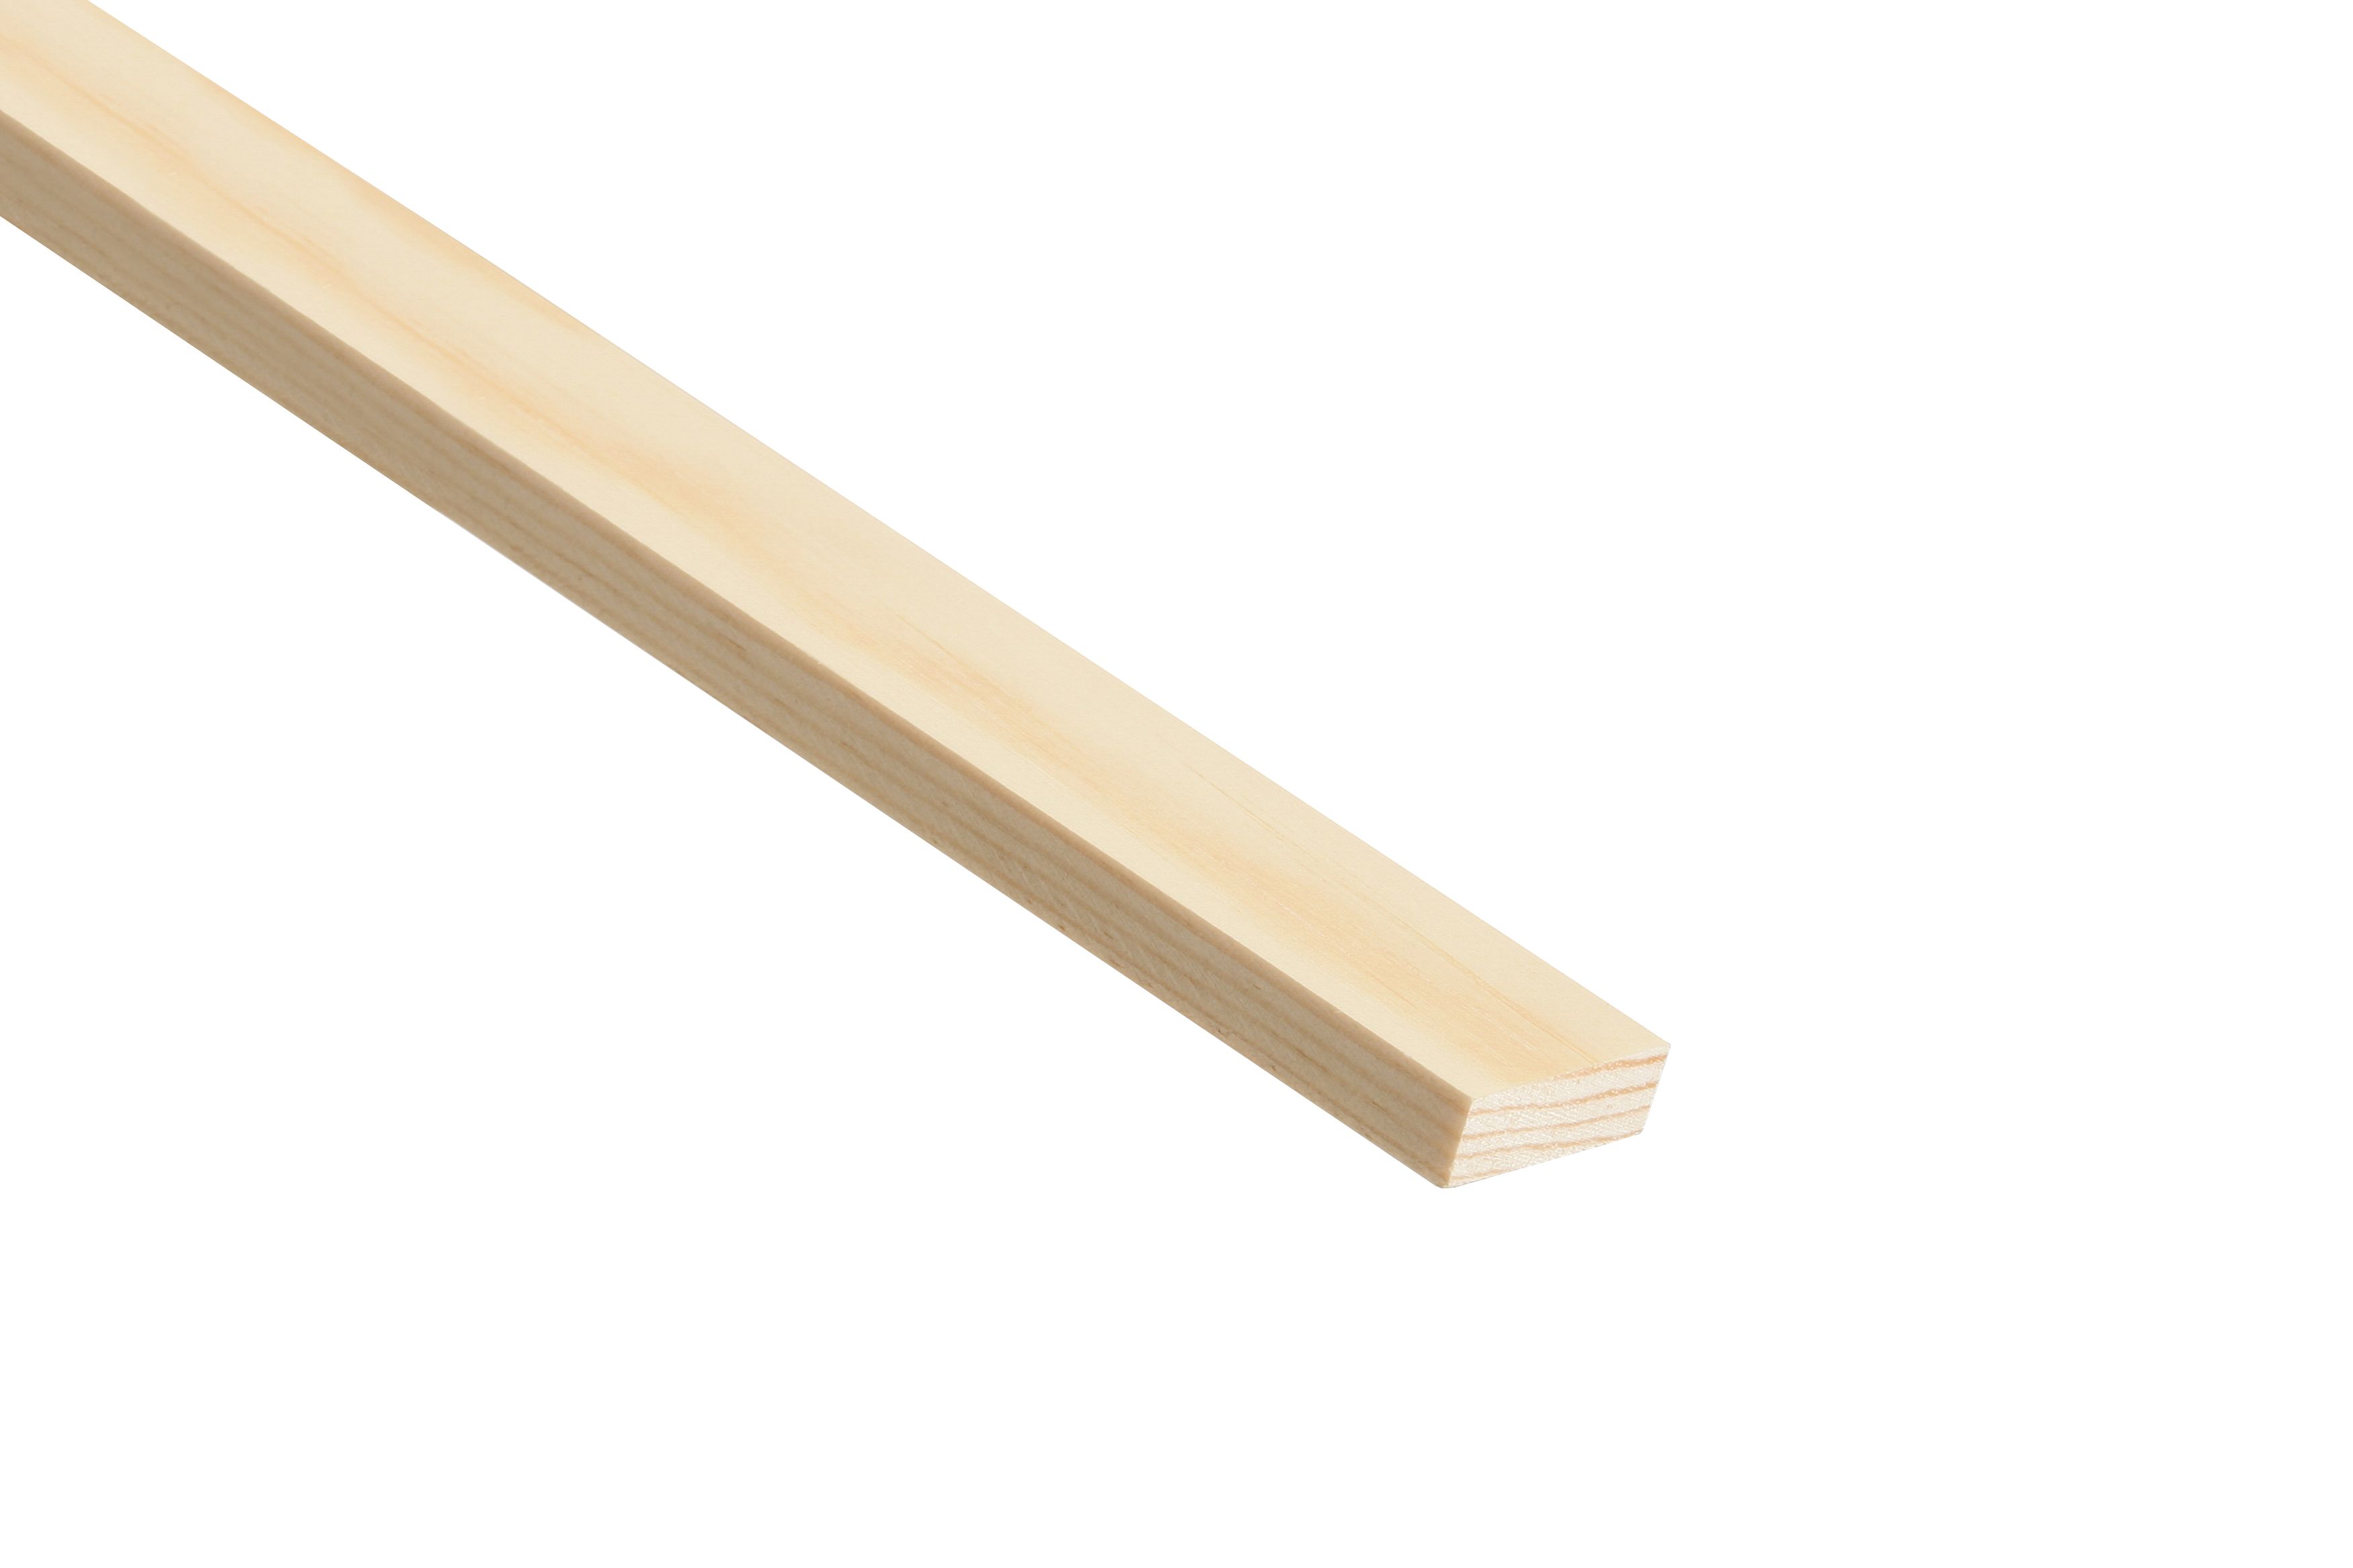 Image of Wickes Pine Stripwood Moulding (PSE) - 6 x 25 x 2400mm